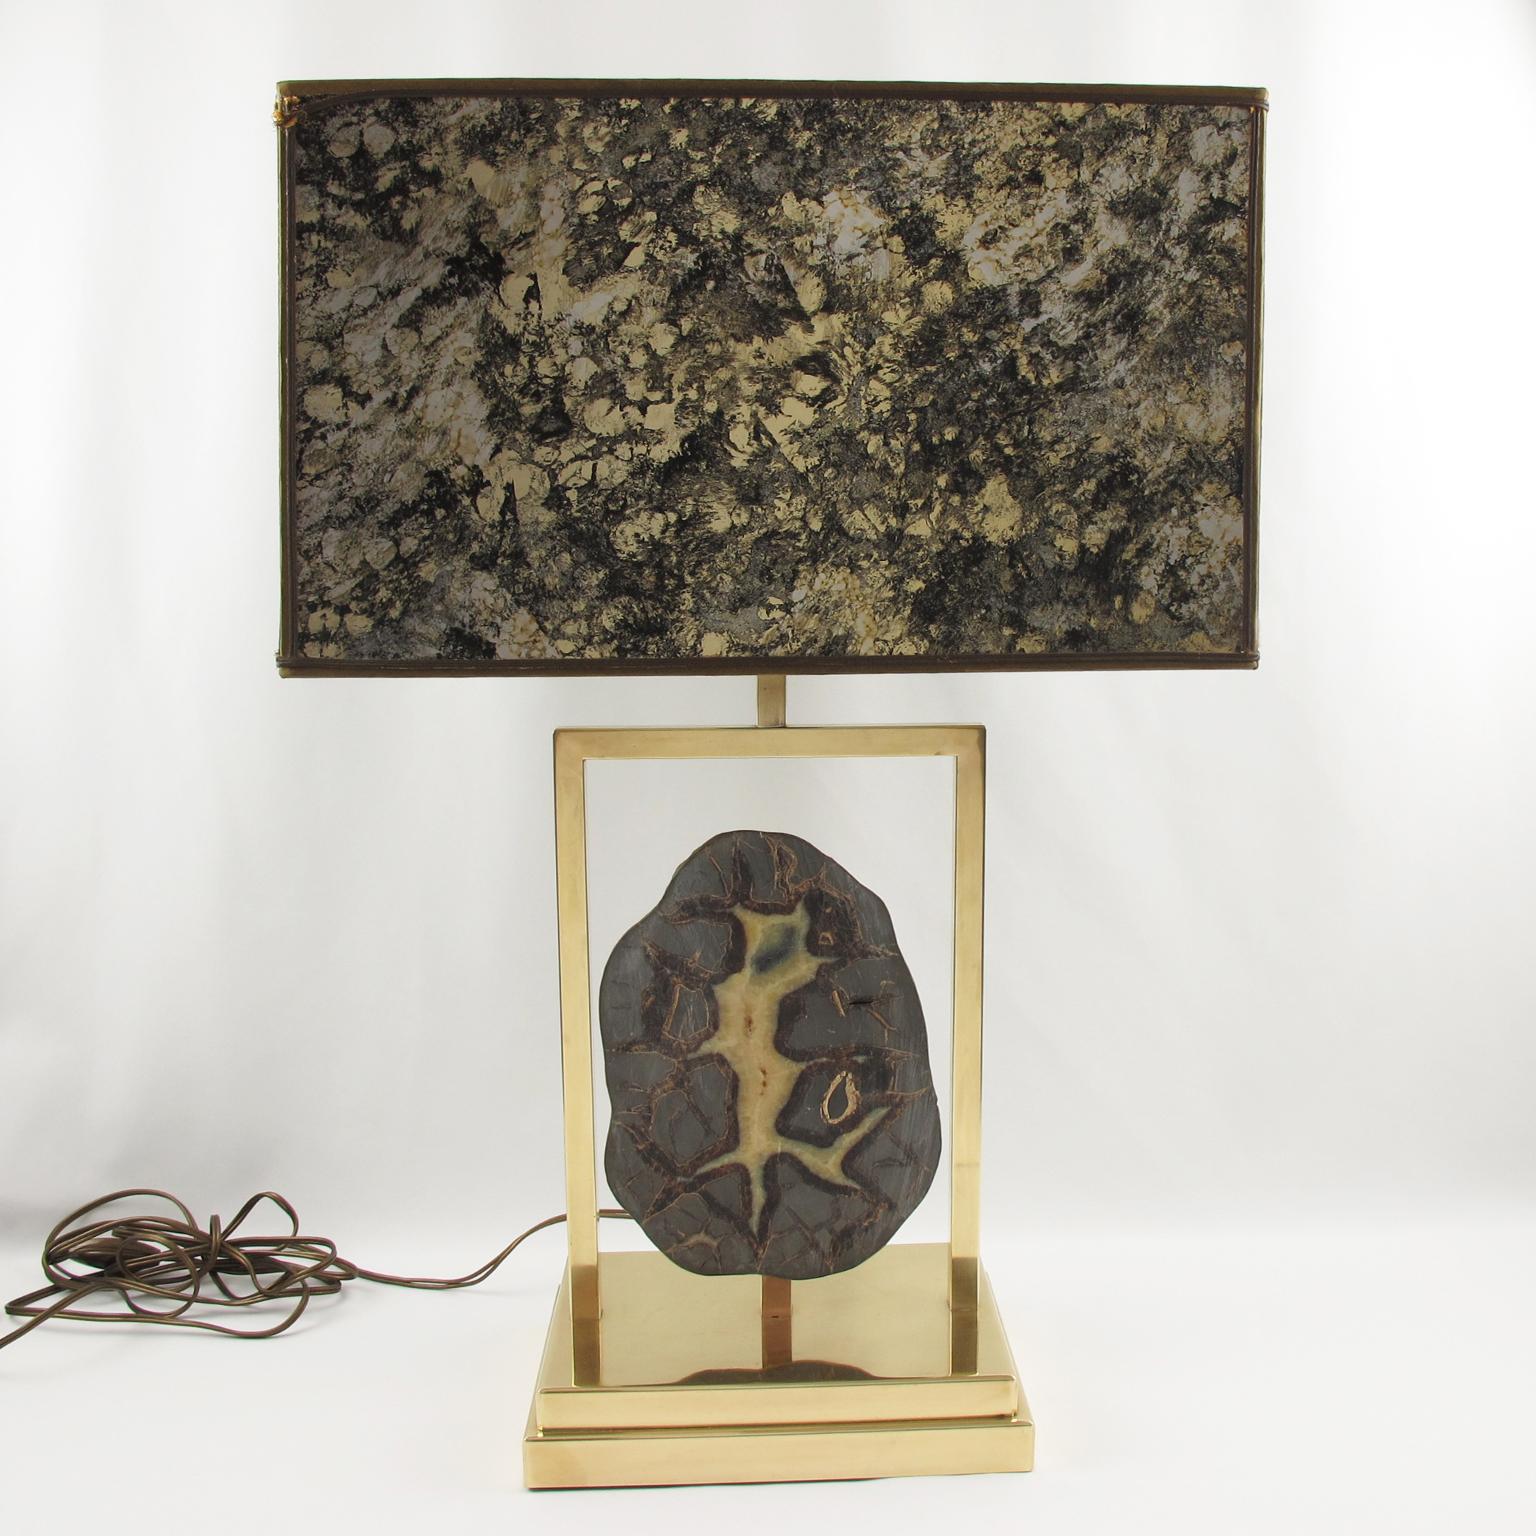 Willy Daro, Belgium, designed this elegant table lamp in the 1970s. The massive polished brass structure has an impressive Dragon Septarian geode stone slab. The original vintage shade, still present, boasts an incredible textured pattern with